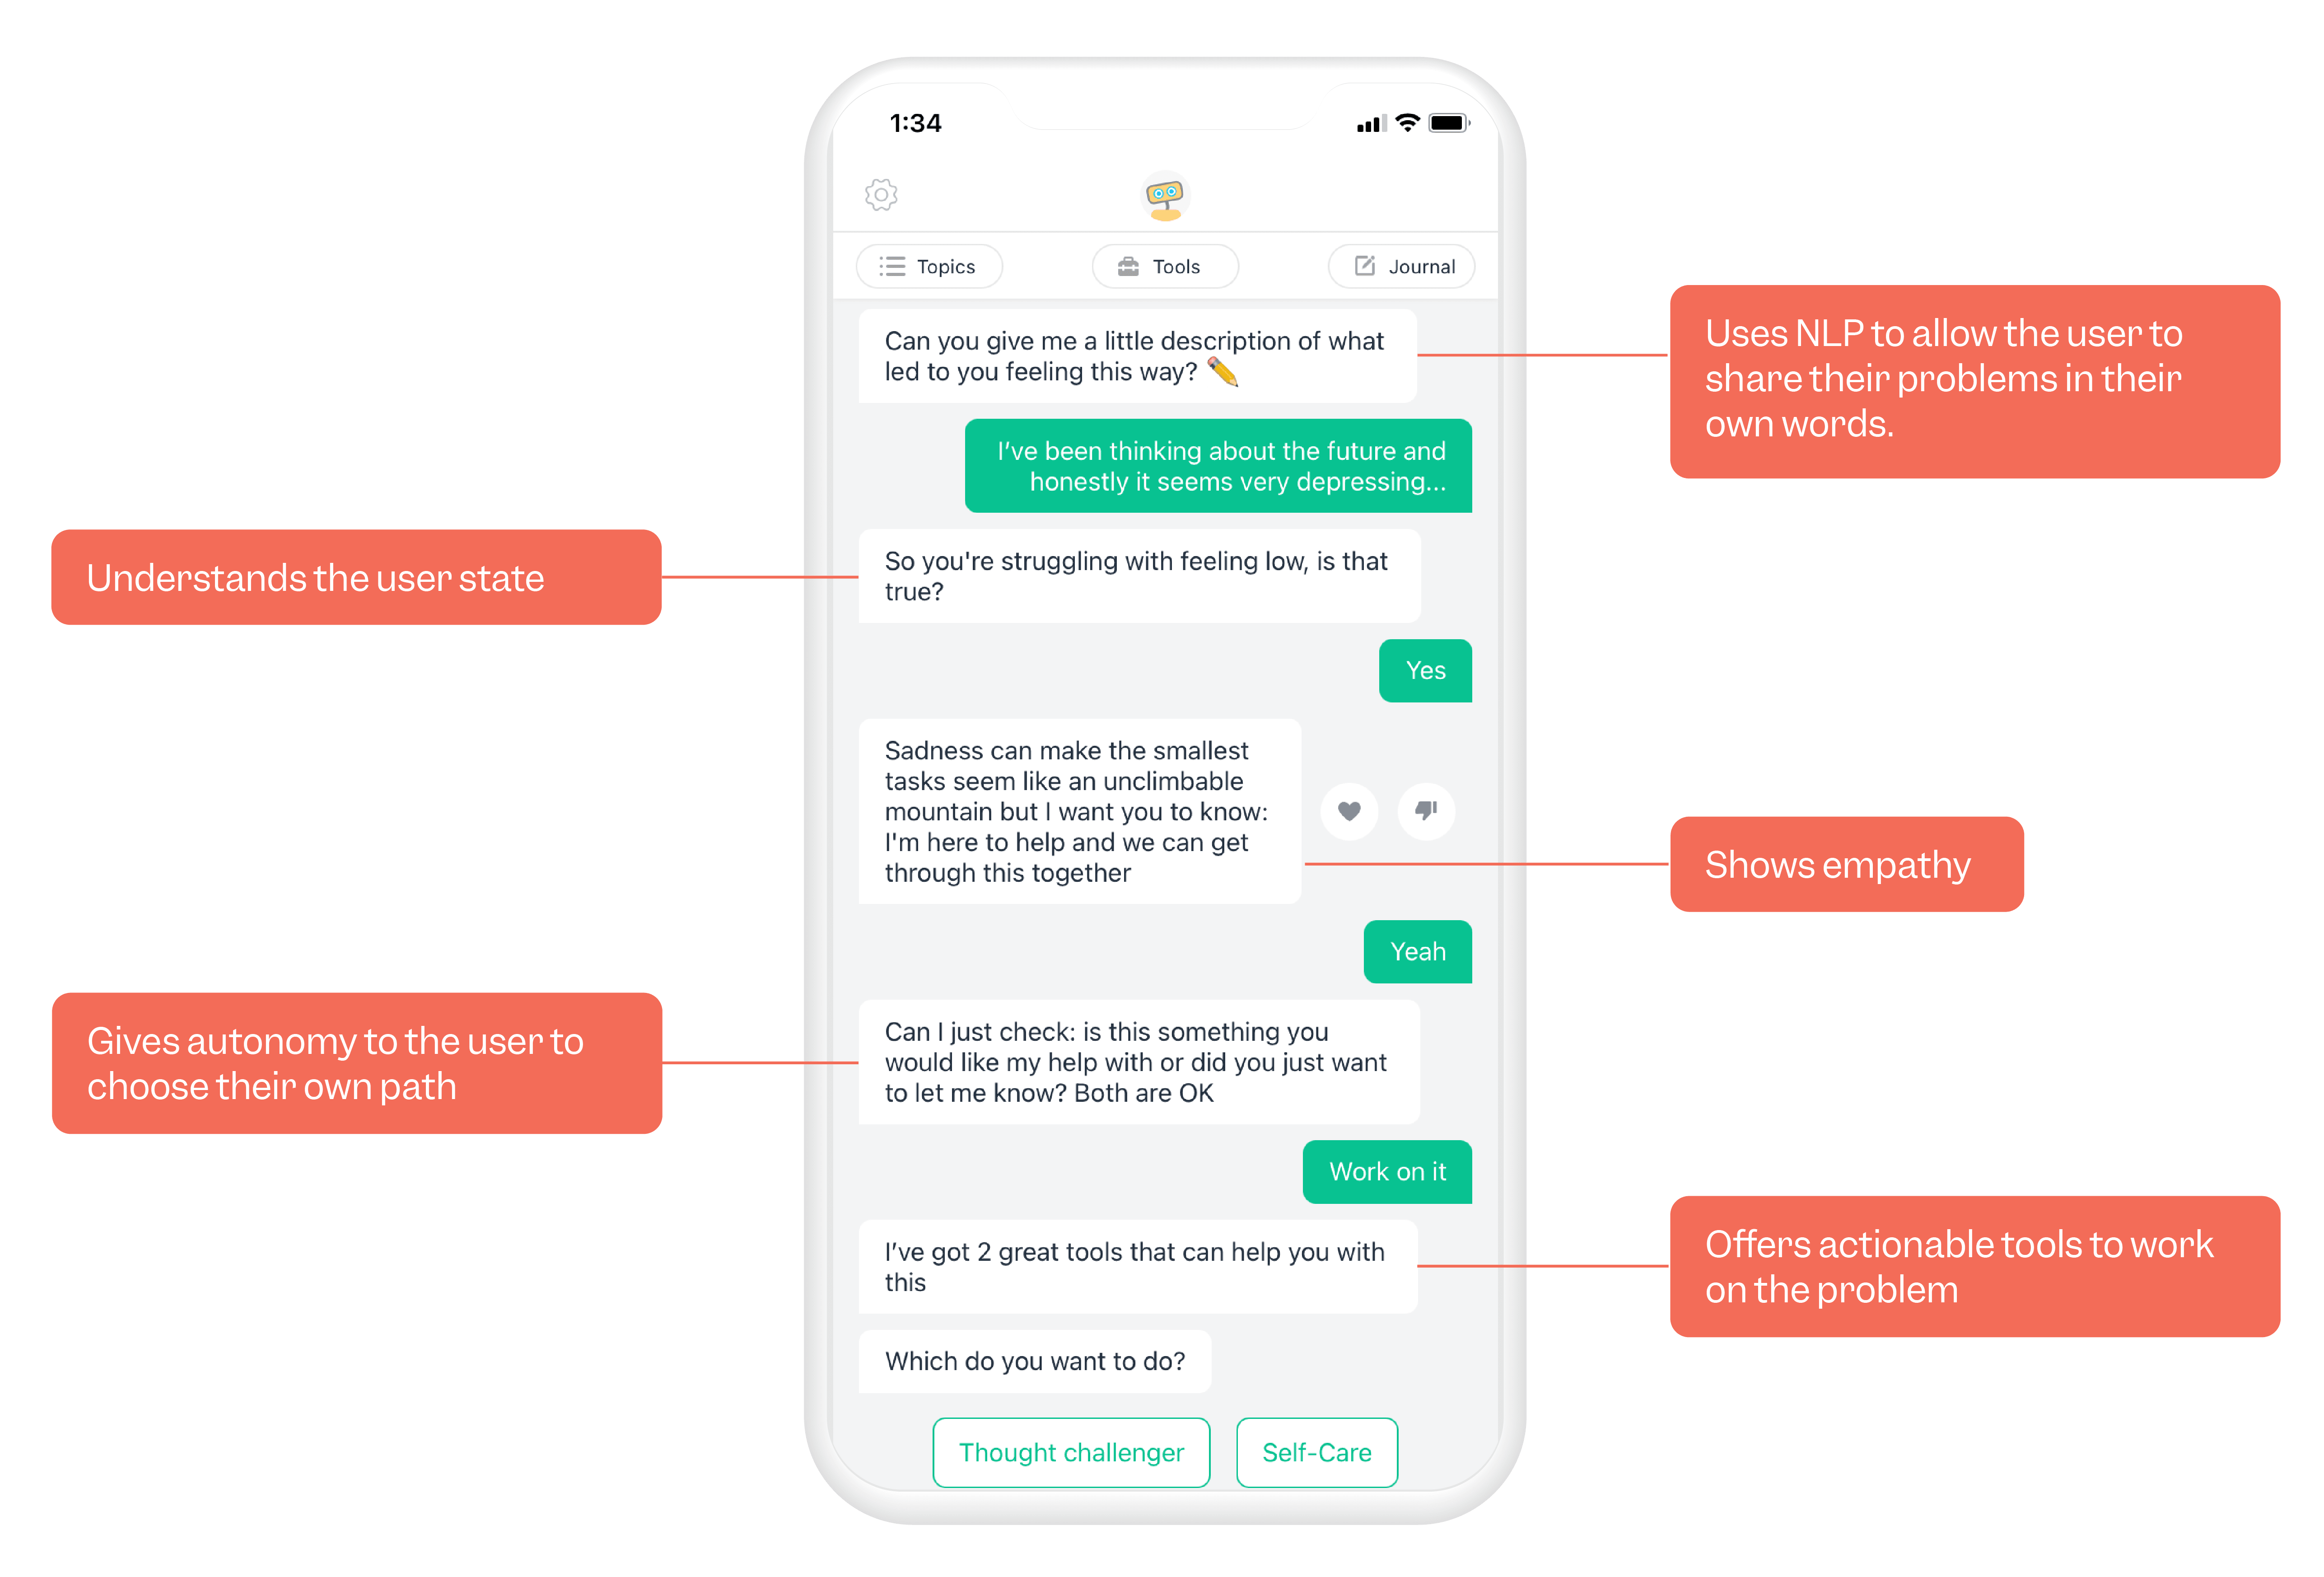 A screen capture shows Woebot Health’s chatbot responding to a user’s questions as seen on a mobile app interface